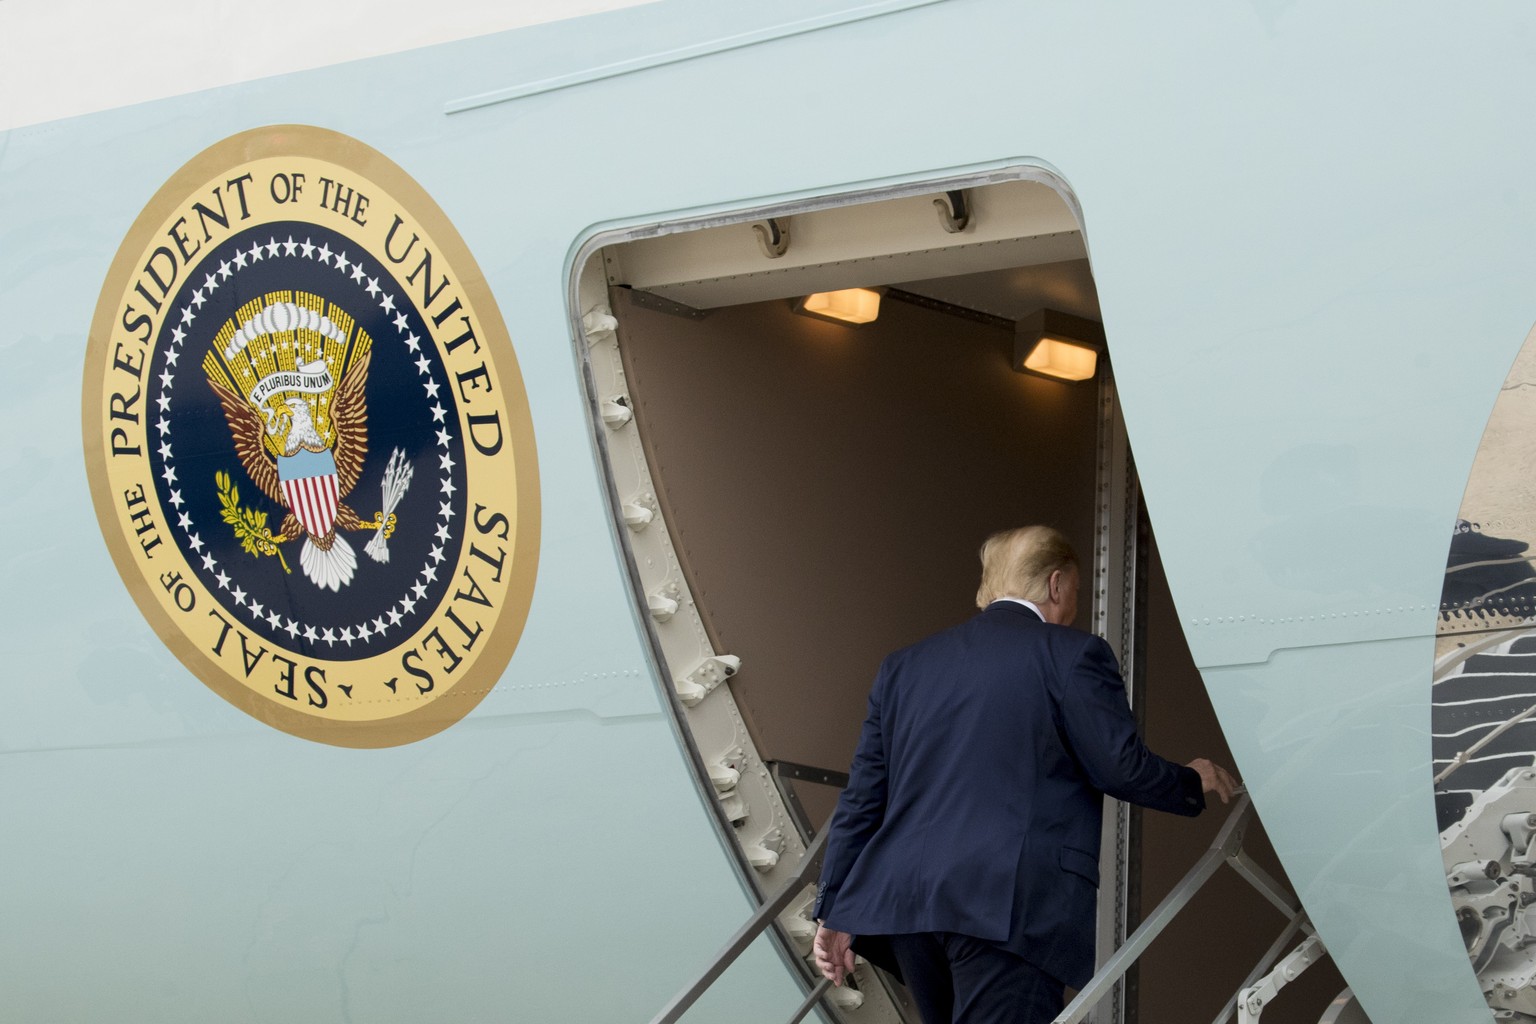 President Donald Trump boards Air Force One at Andrews Air Force Base, Md., Thursday, Oct. 17, 2019, to travel to Fort Worth, Texas. (AP Photo/Andrew Harnik)
Donald Trump